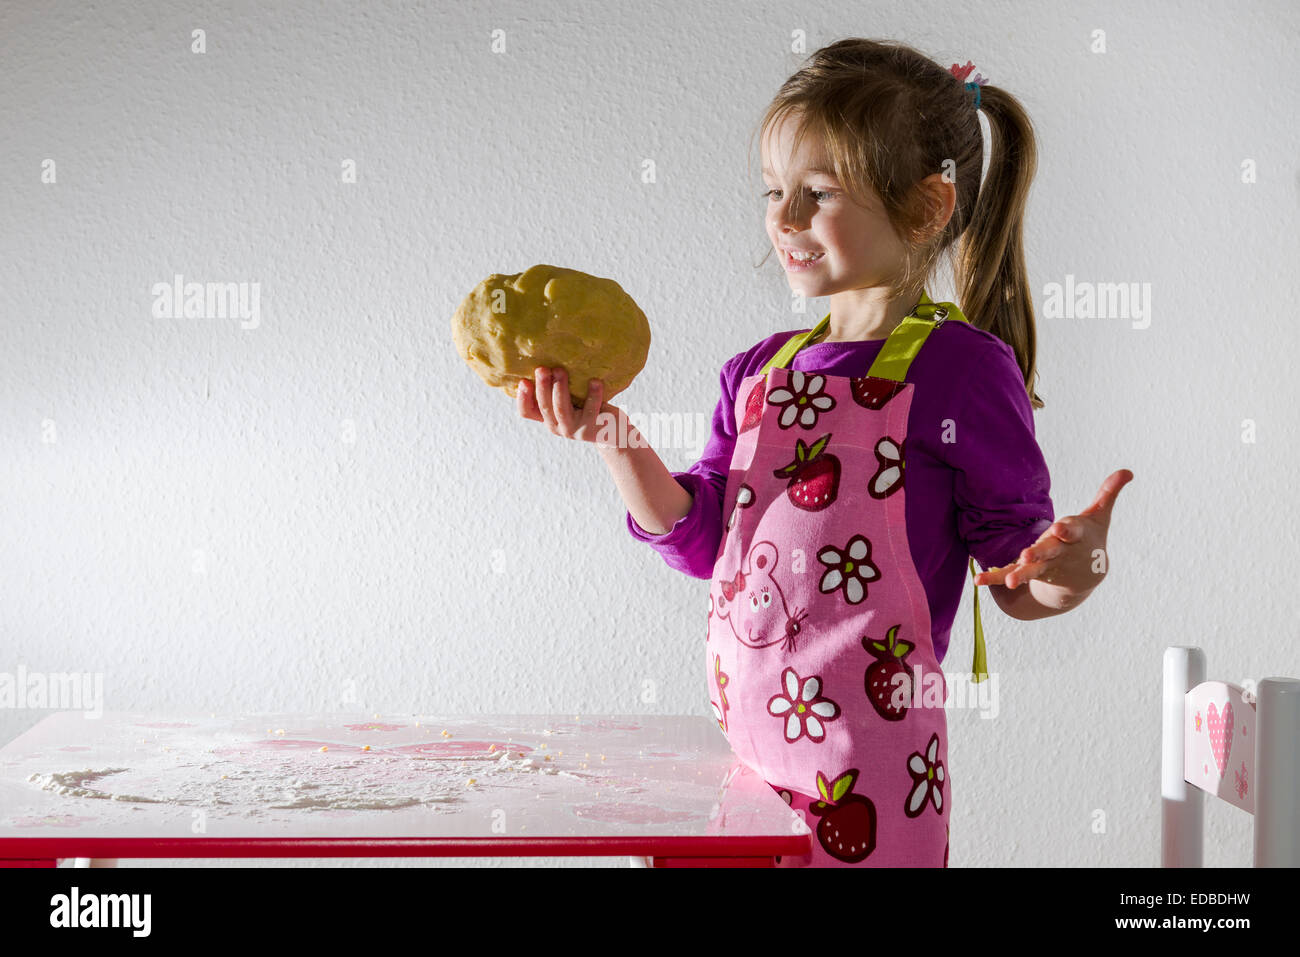 Girl, 3 years, baking, holding a lump of dough in her hand Stock Photo